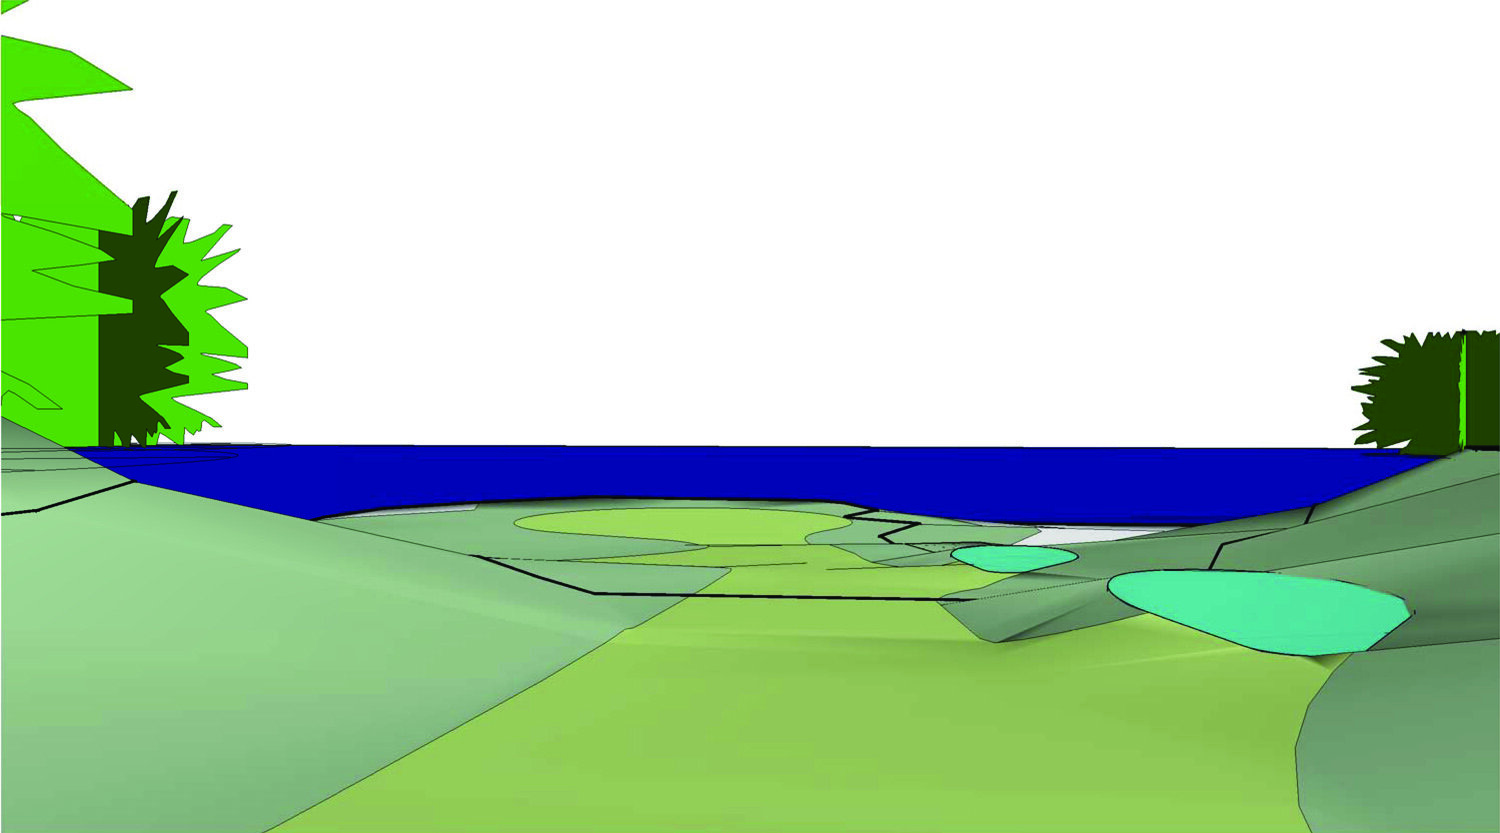 site10 - 3D View - proposed 3D View 24 1500px.jpg